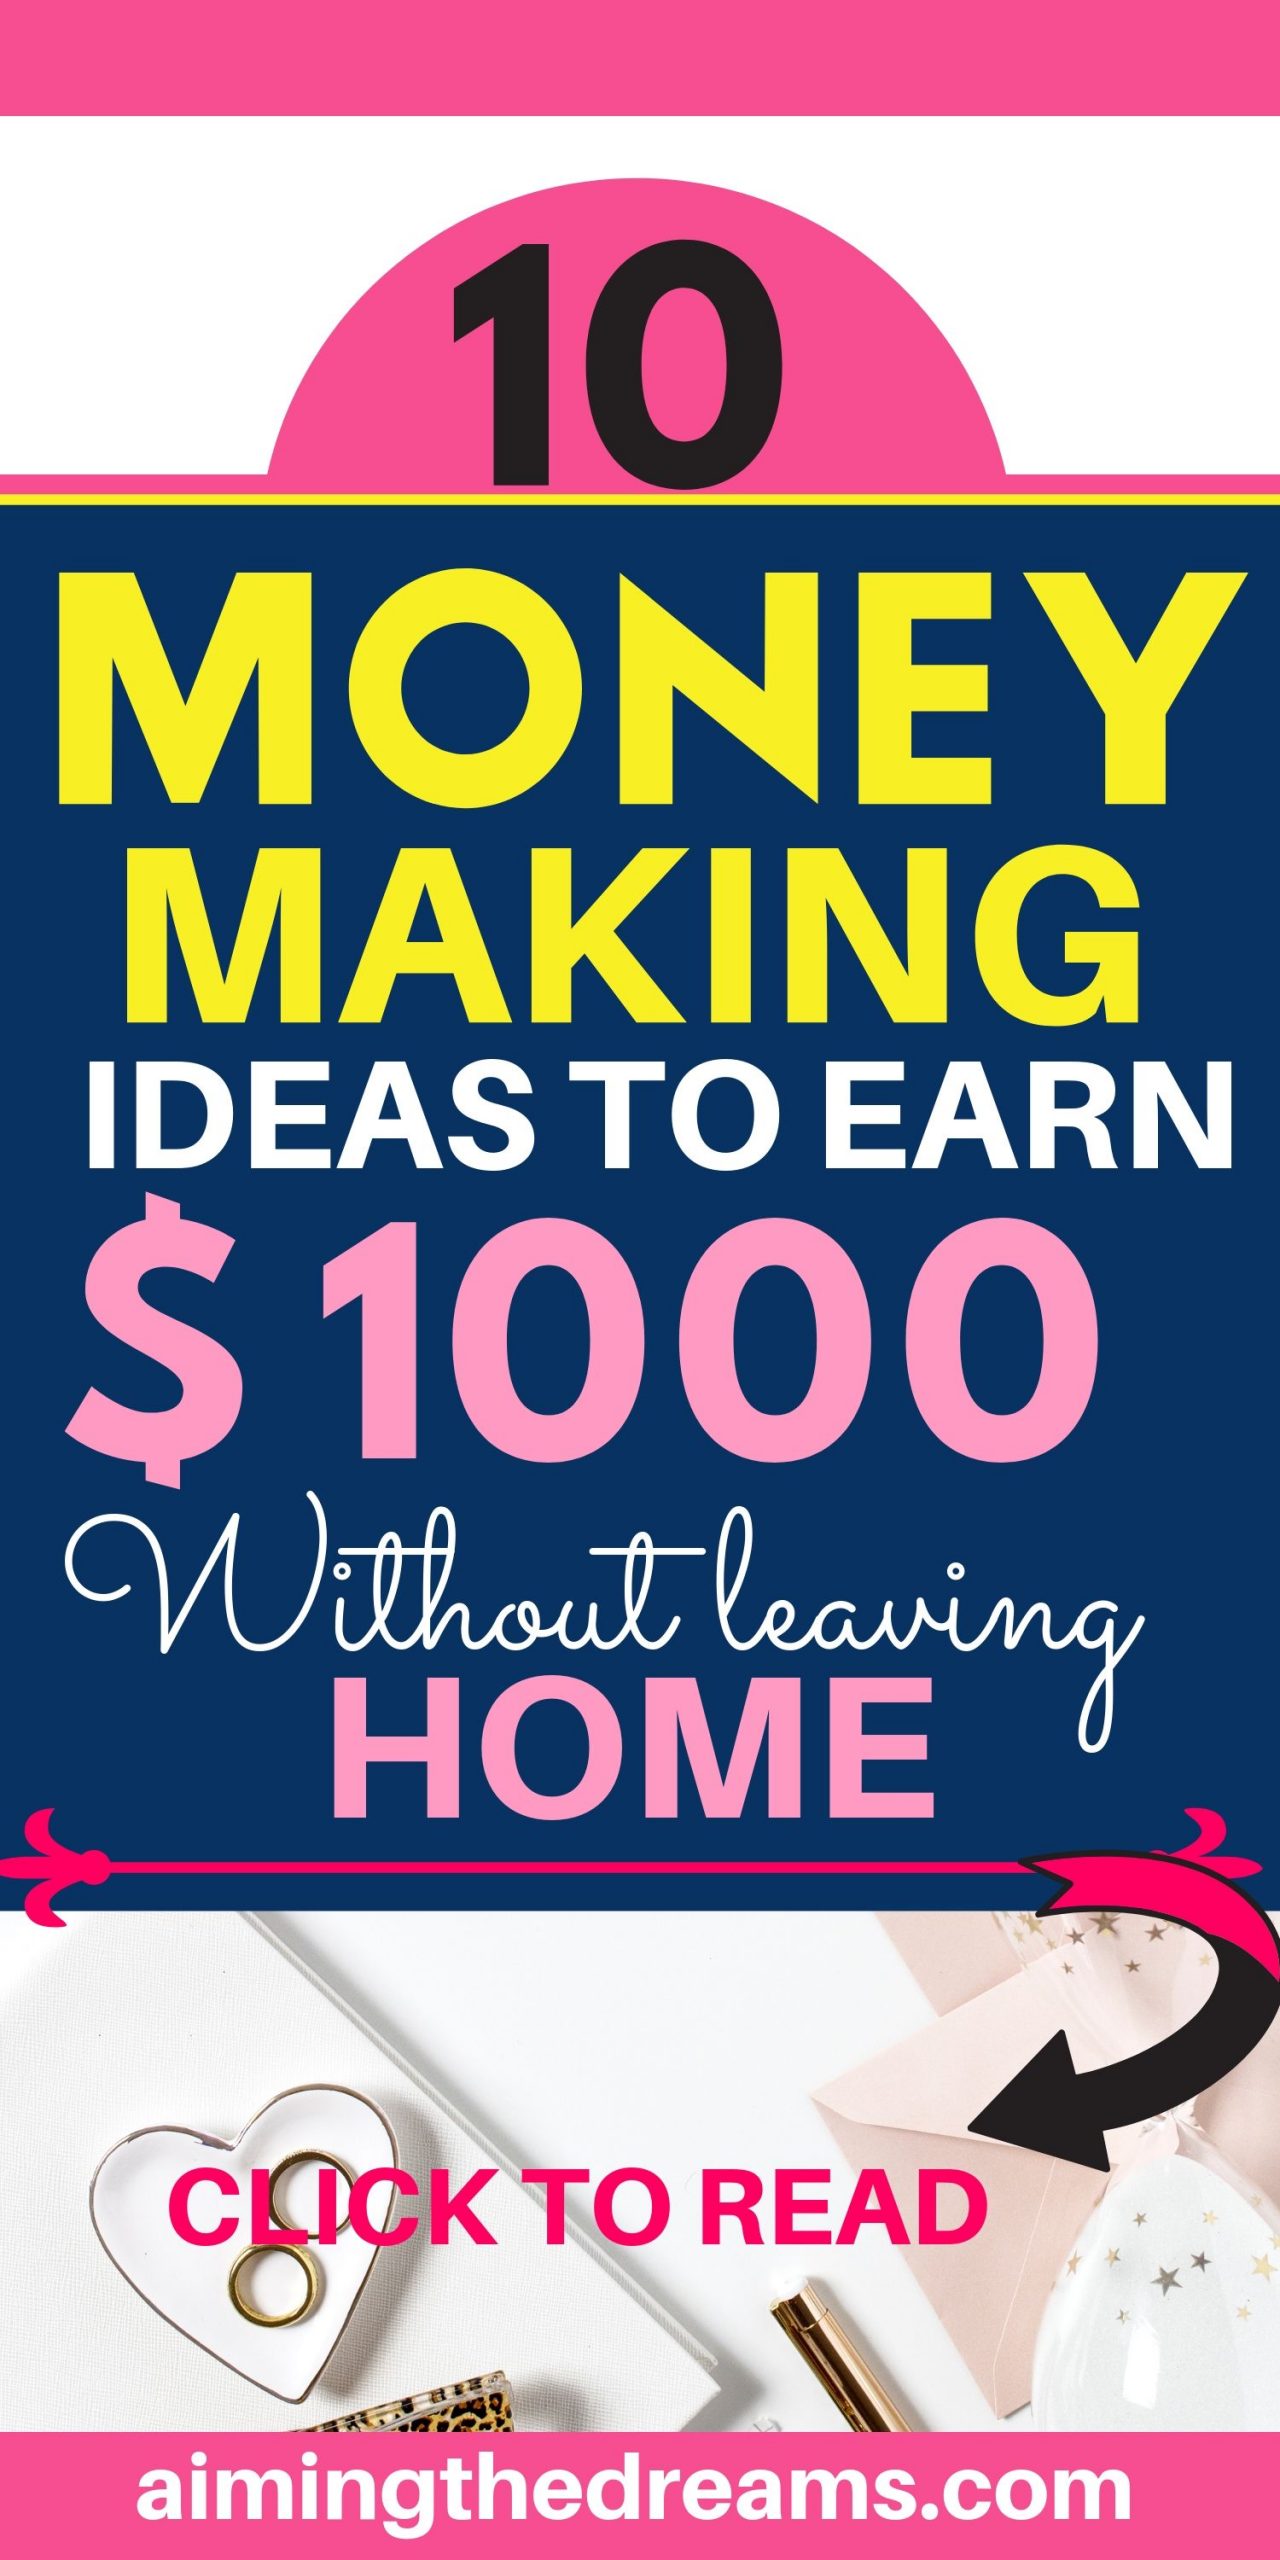 10 Money making ideas to make $1000 without leaving home.